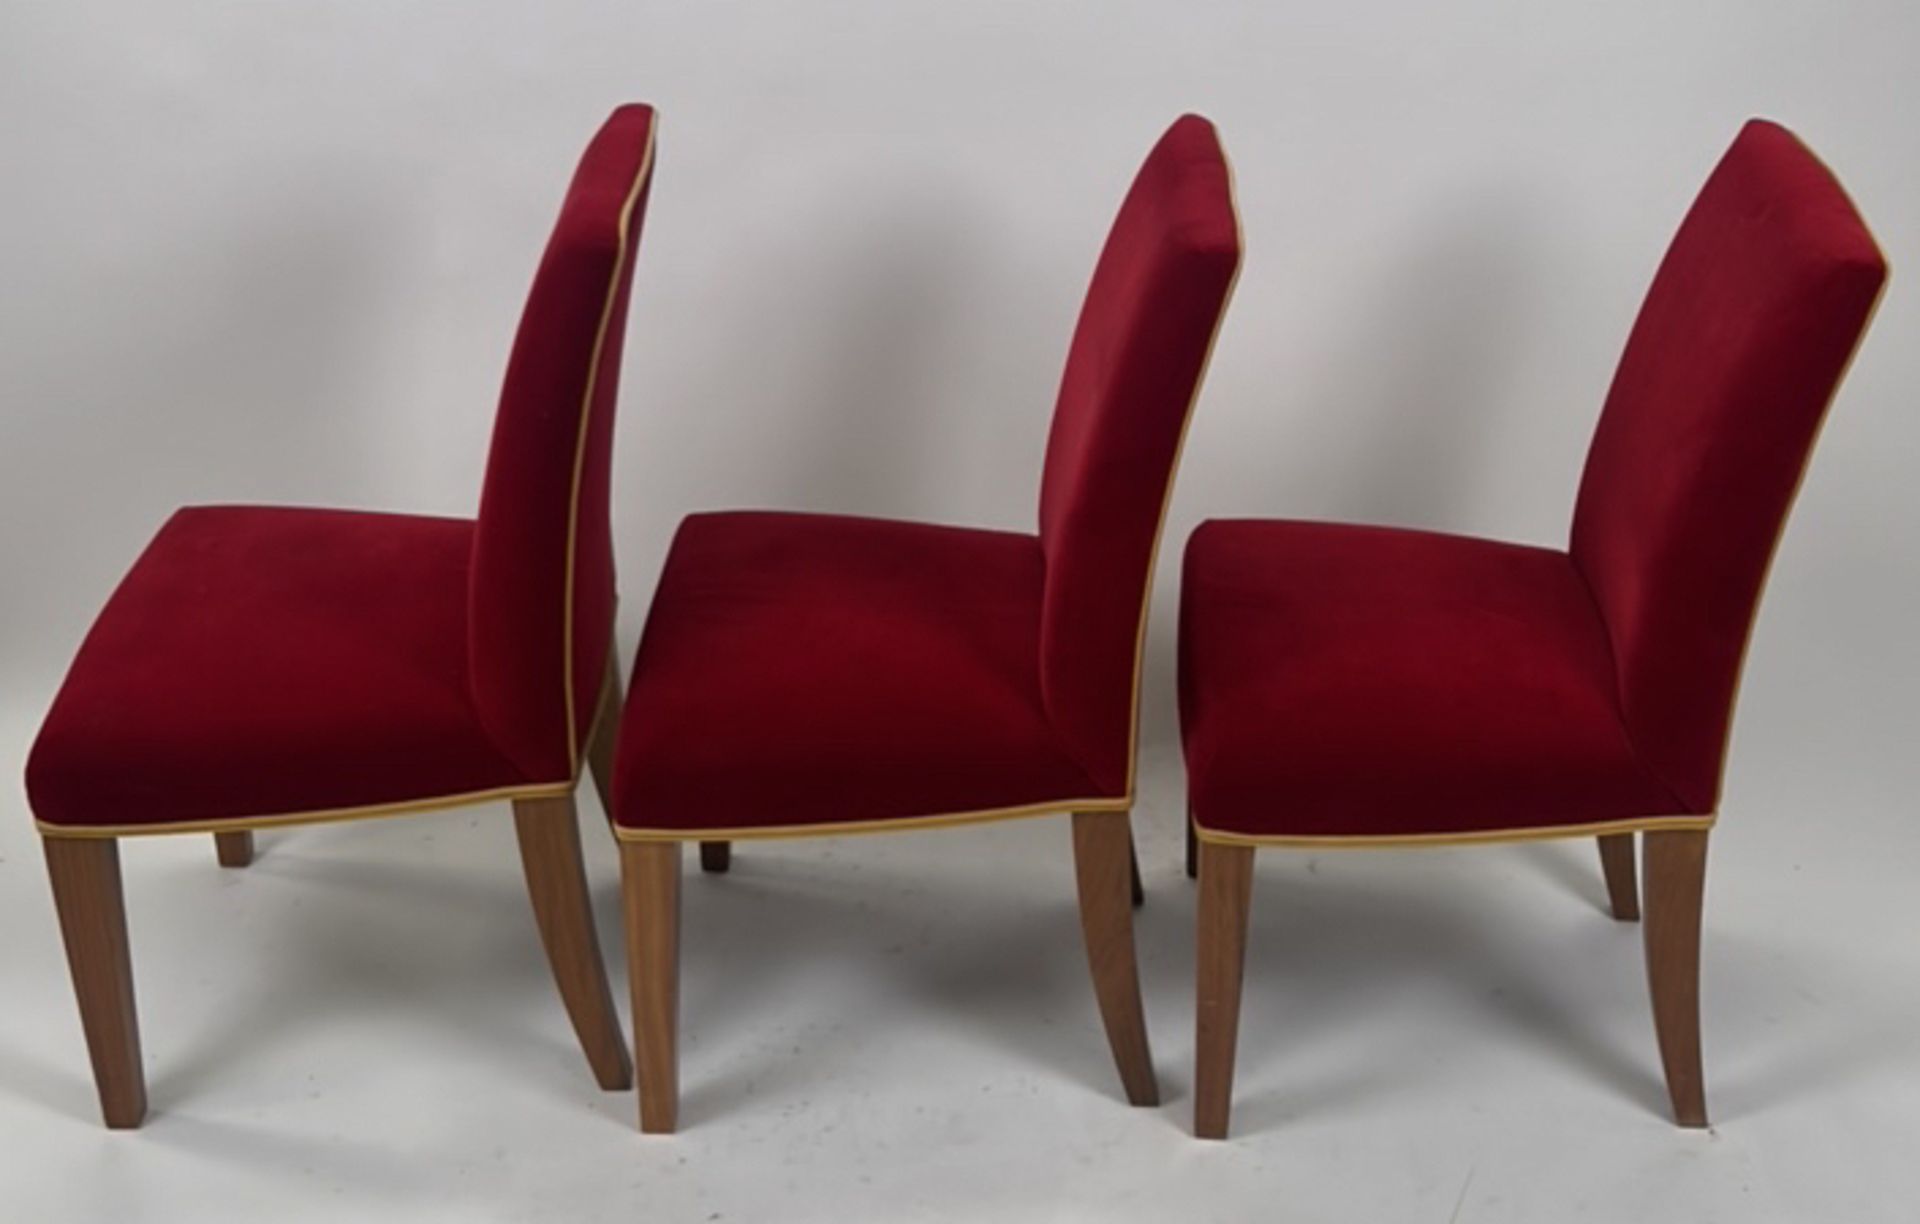 Trio of David Linley Dining Chairs - Image 3 of 8